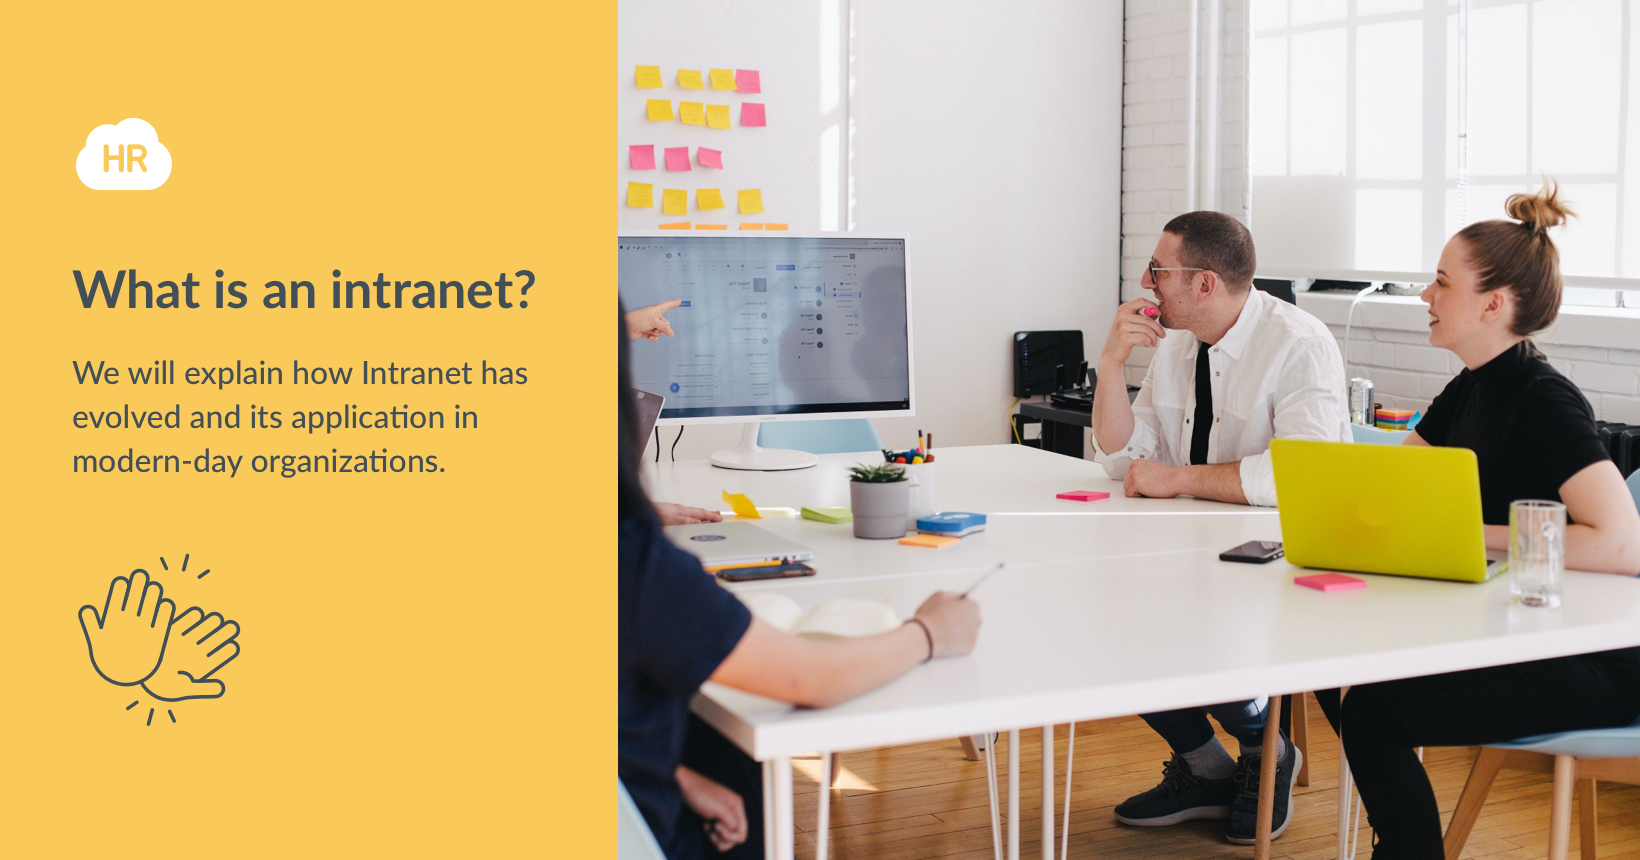 What is an intranet?